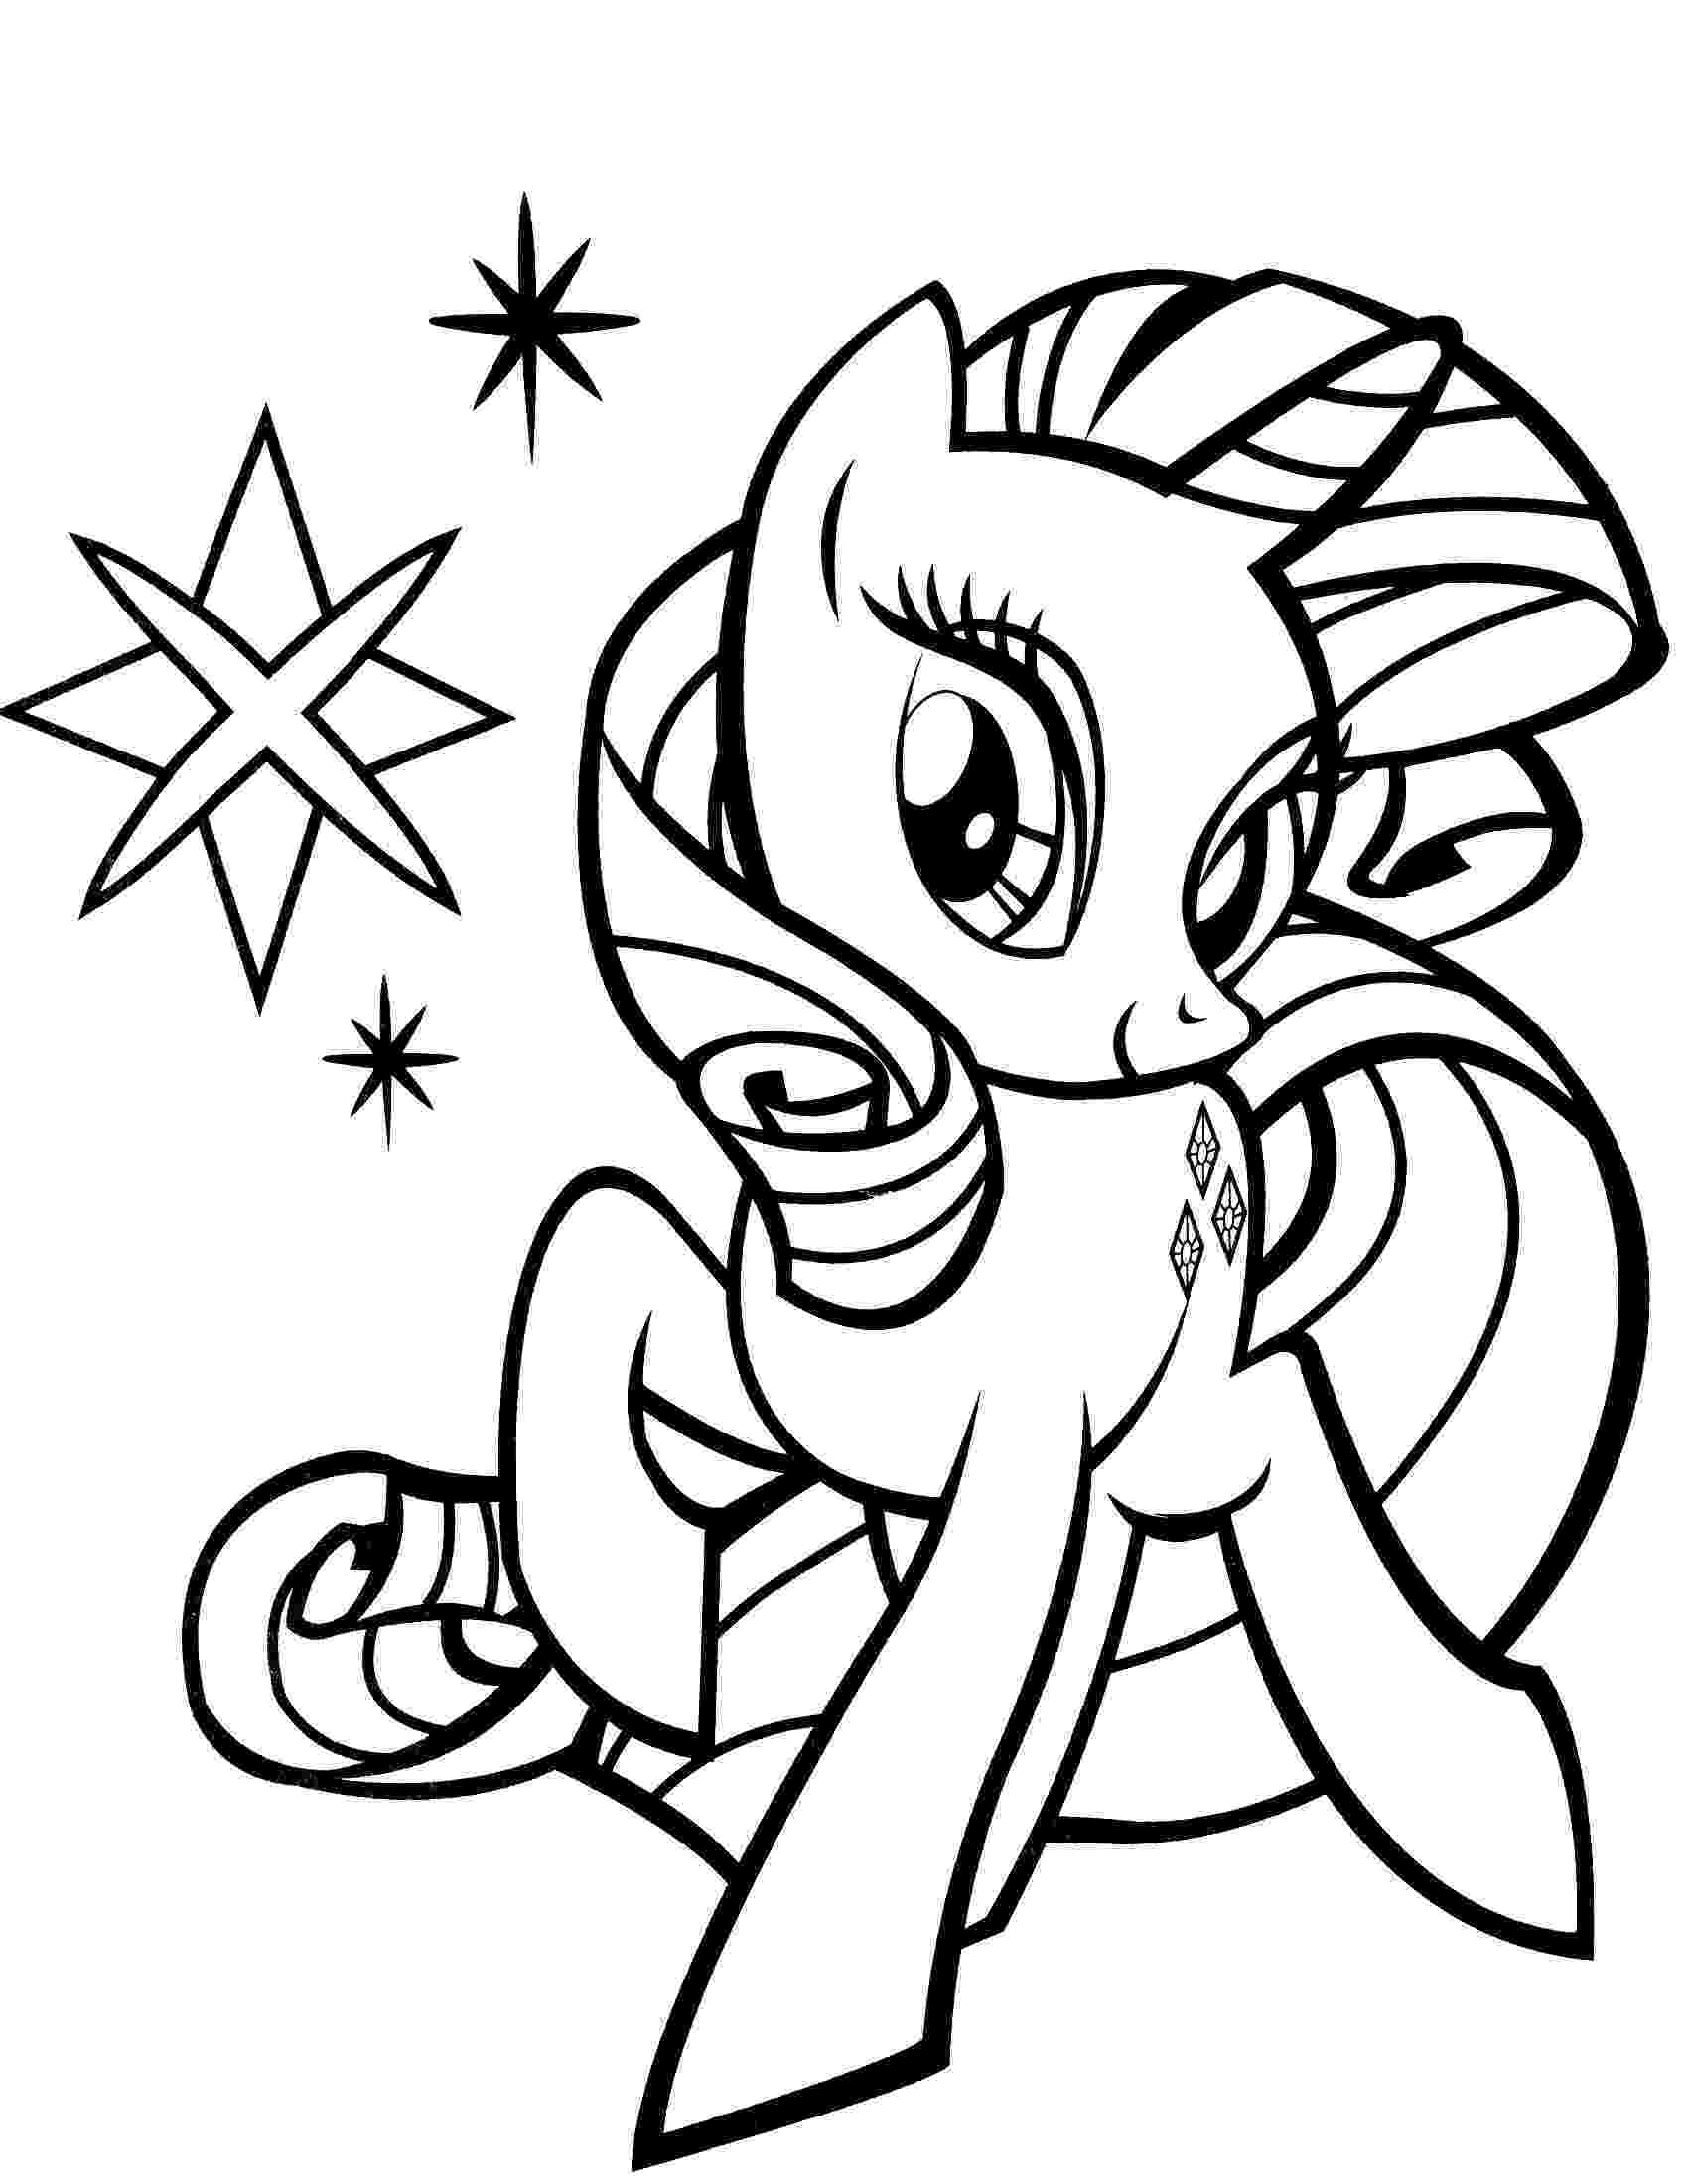 coloring pages of my little pony my little pony coloring pages team colors pages pony my little coloring of 